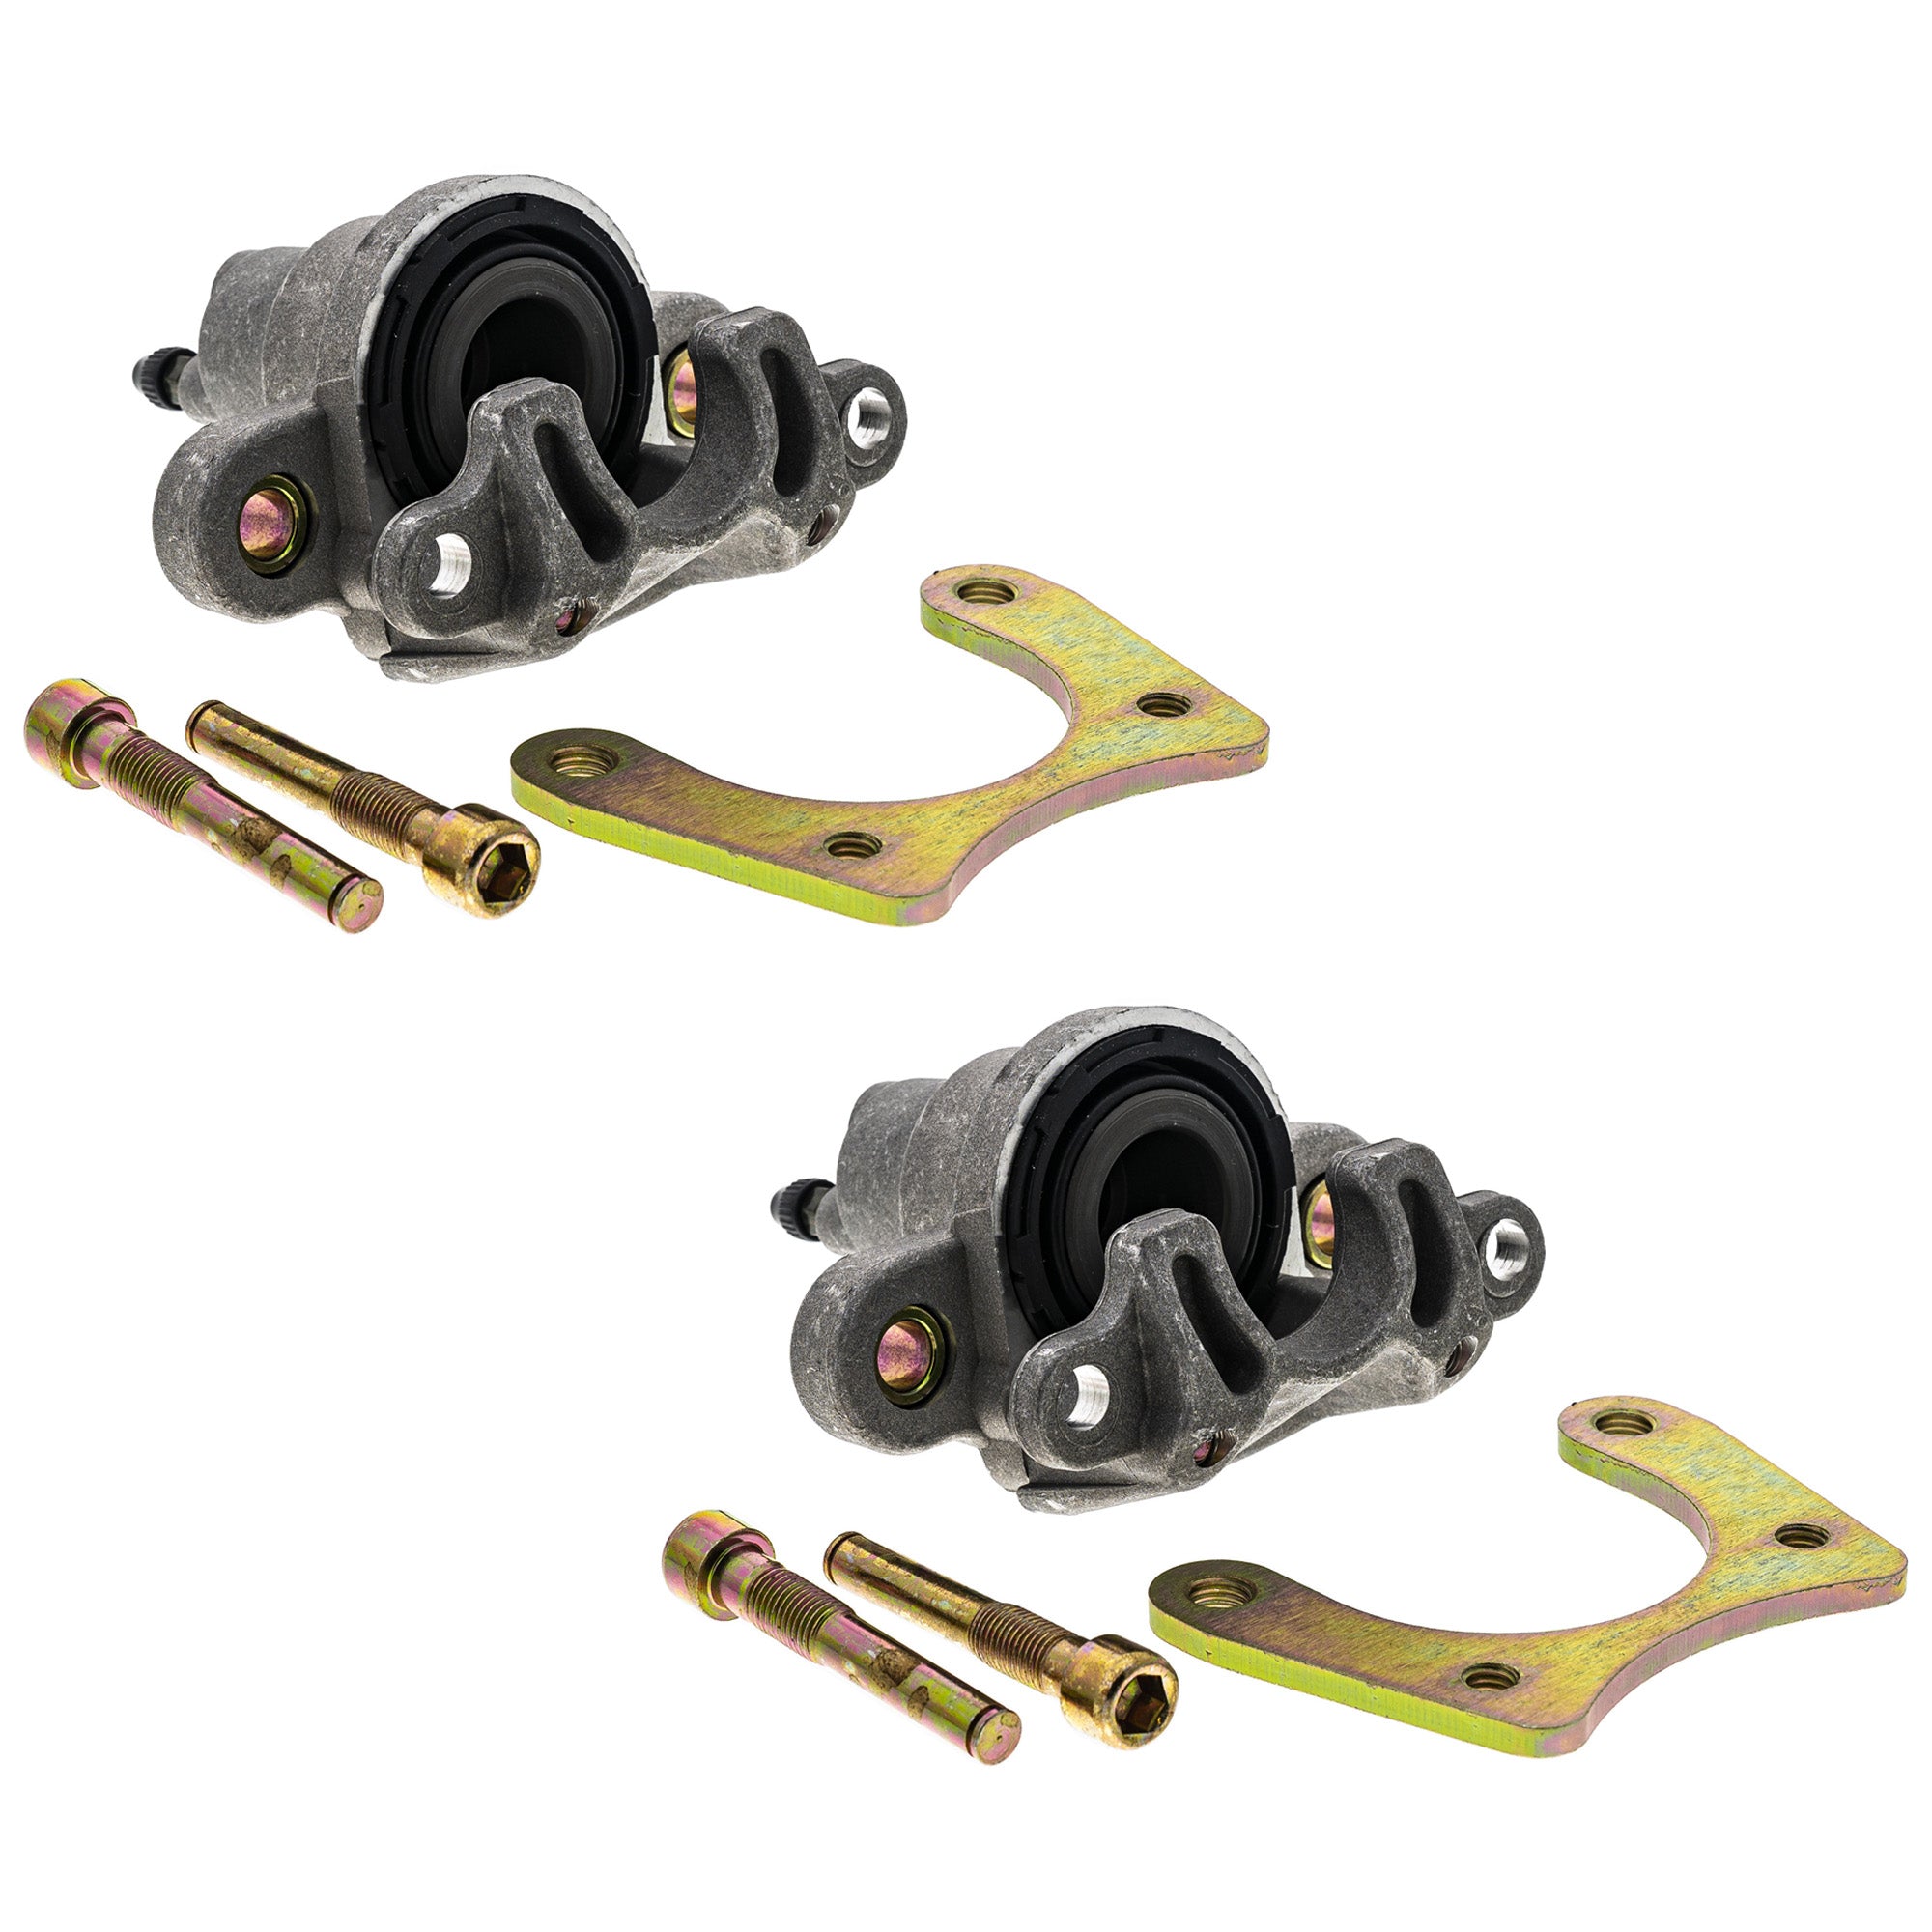 Brake Caliper Assembly 2-Pack for zOTHER Polaris Xpedition Trail Sportsman Scrambler NICHE 519-CCL2253P